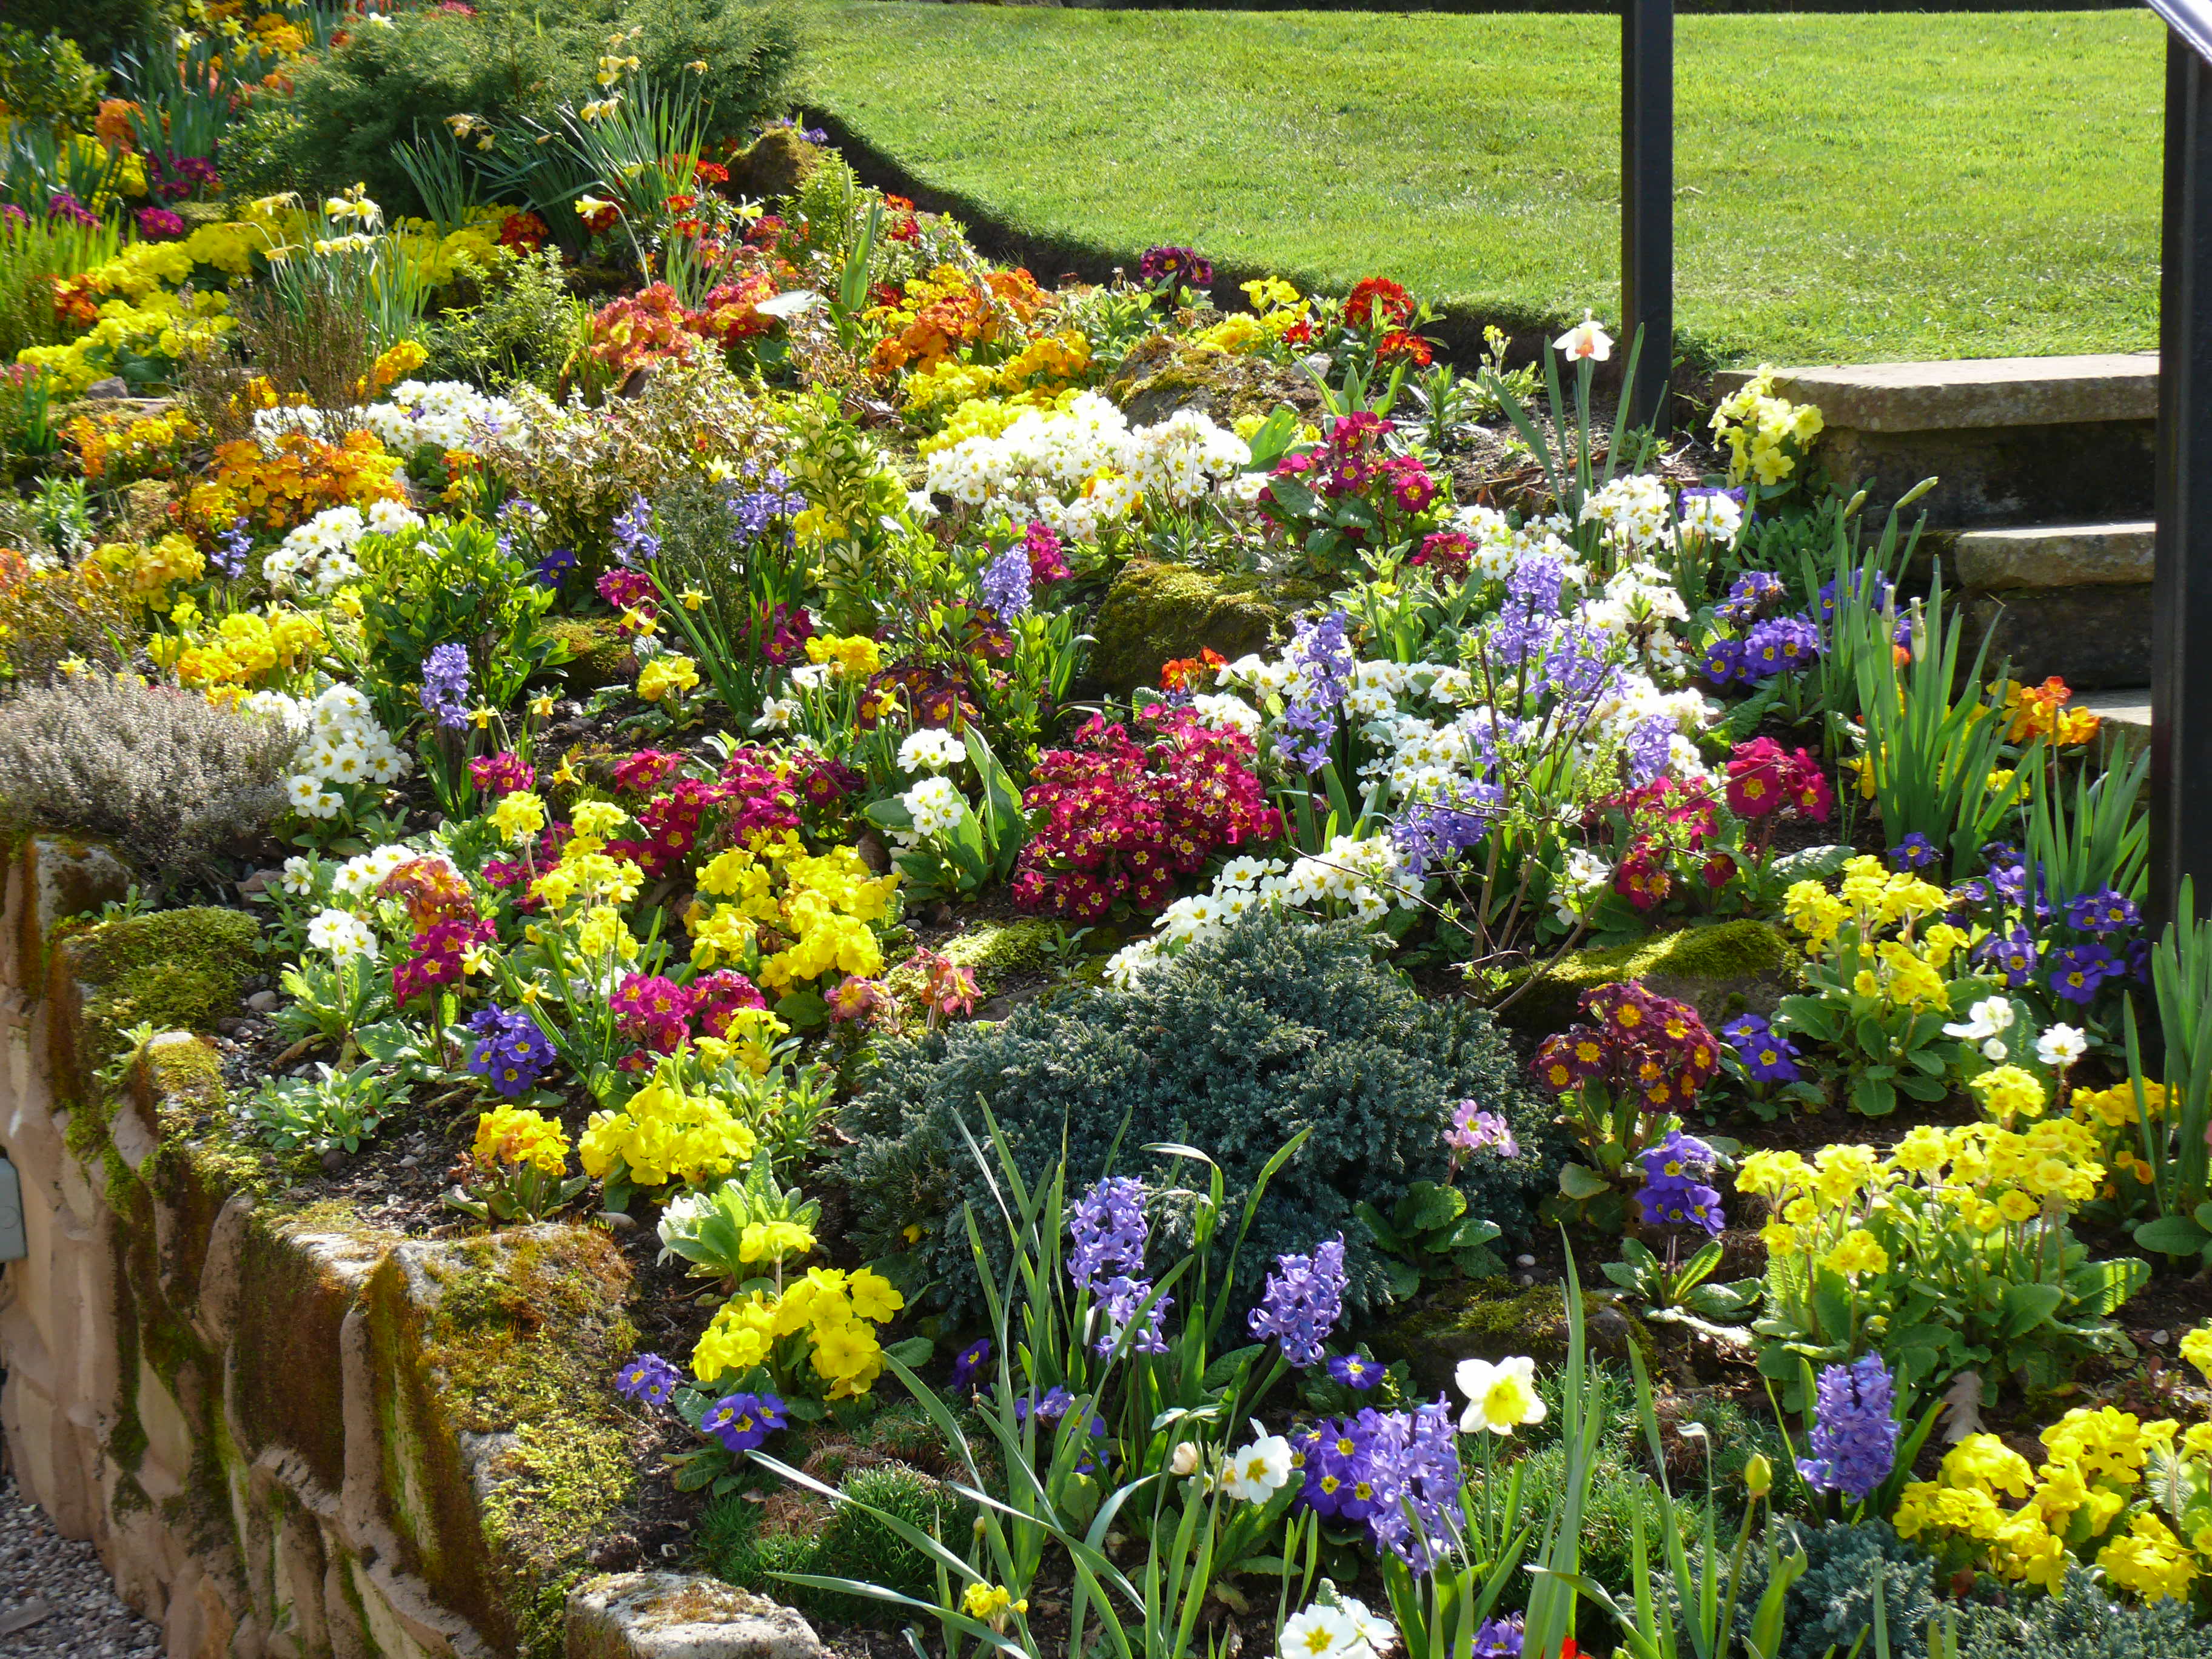 Top Garden Tips for May